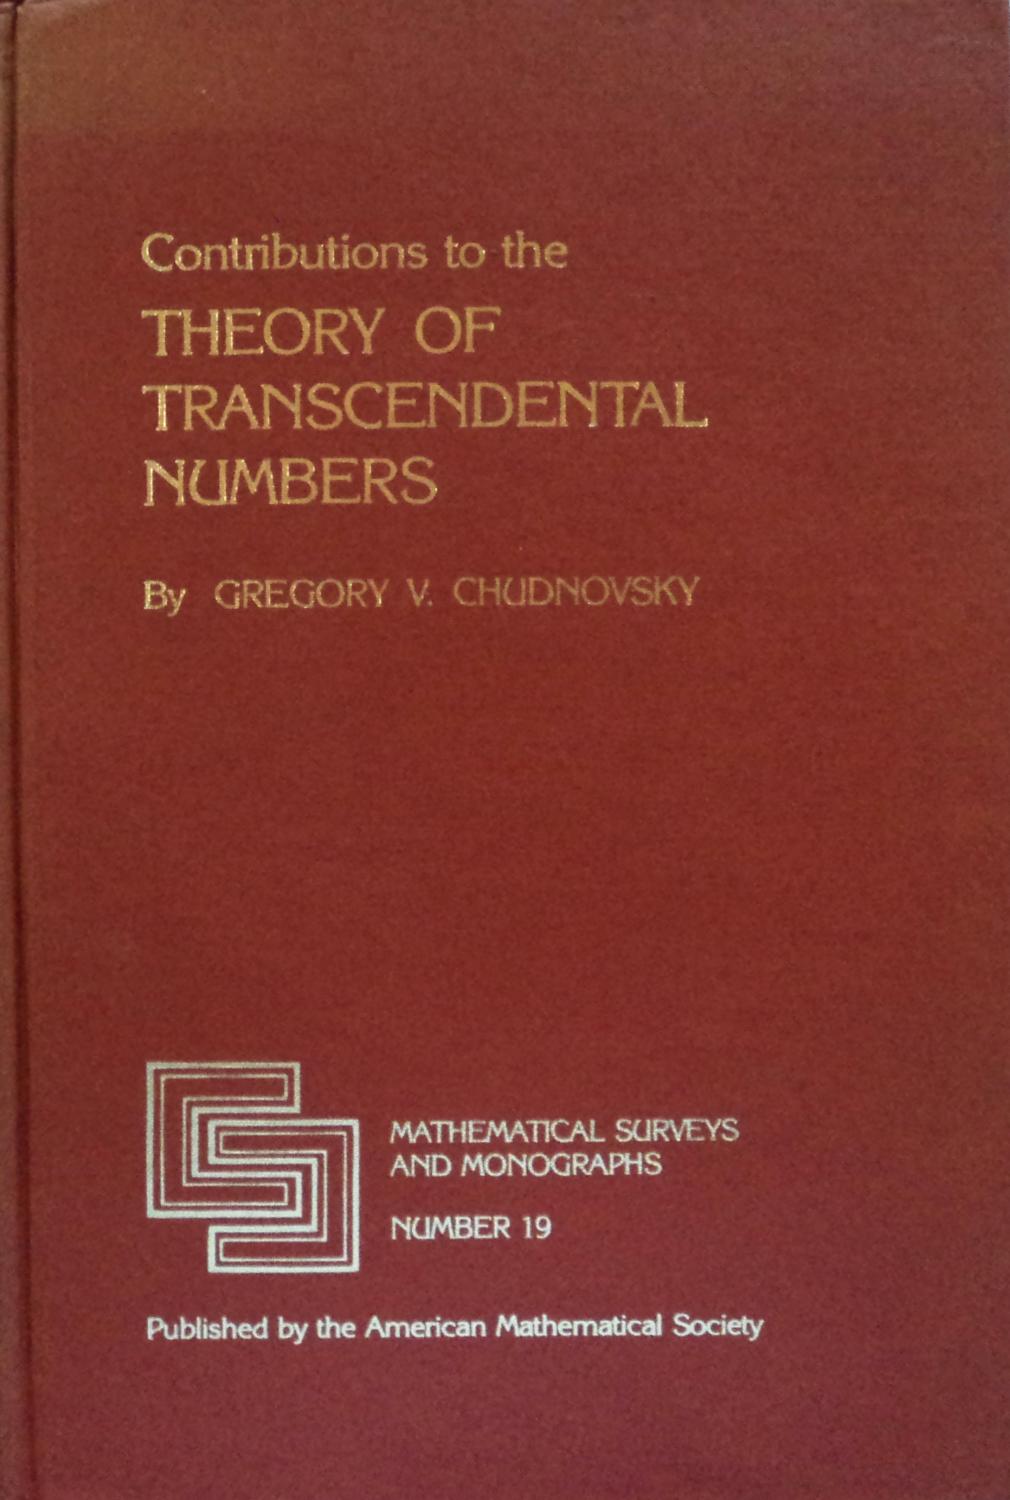 Contributions to the Theory of Transcendental Numbers (Mathematical Surveys and Monographs, 19) - Gregory V. Chudnovsky